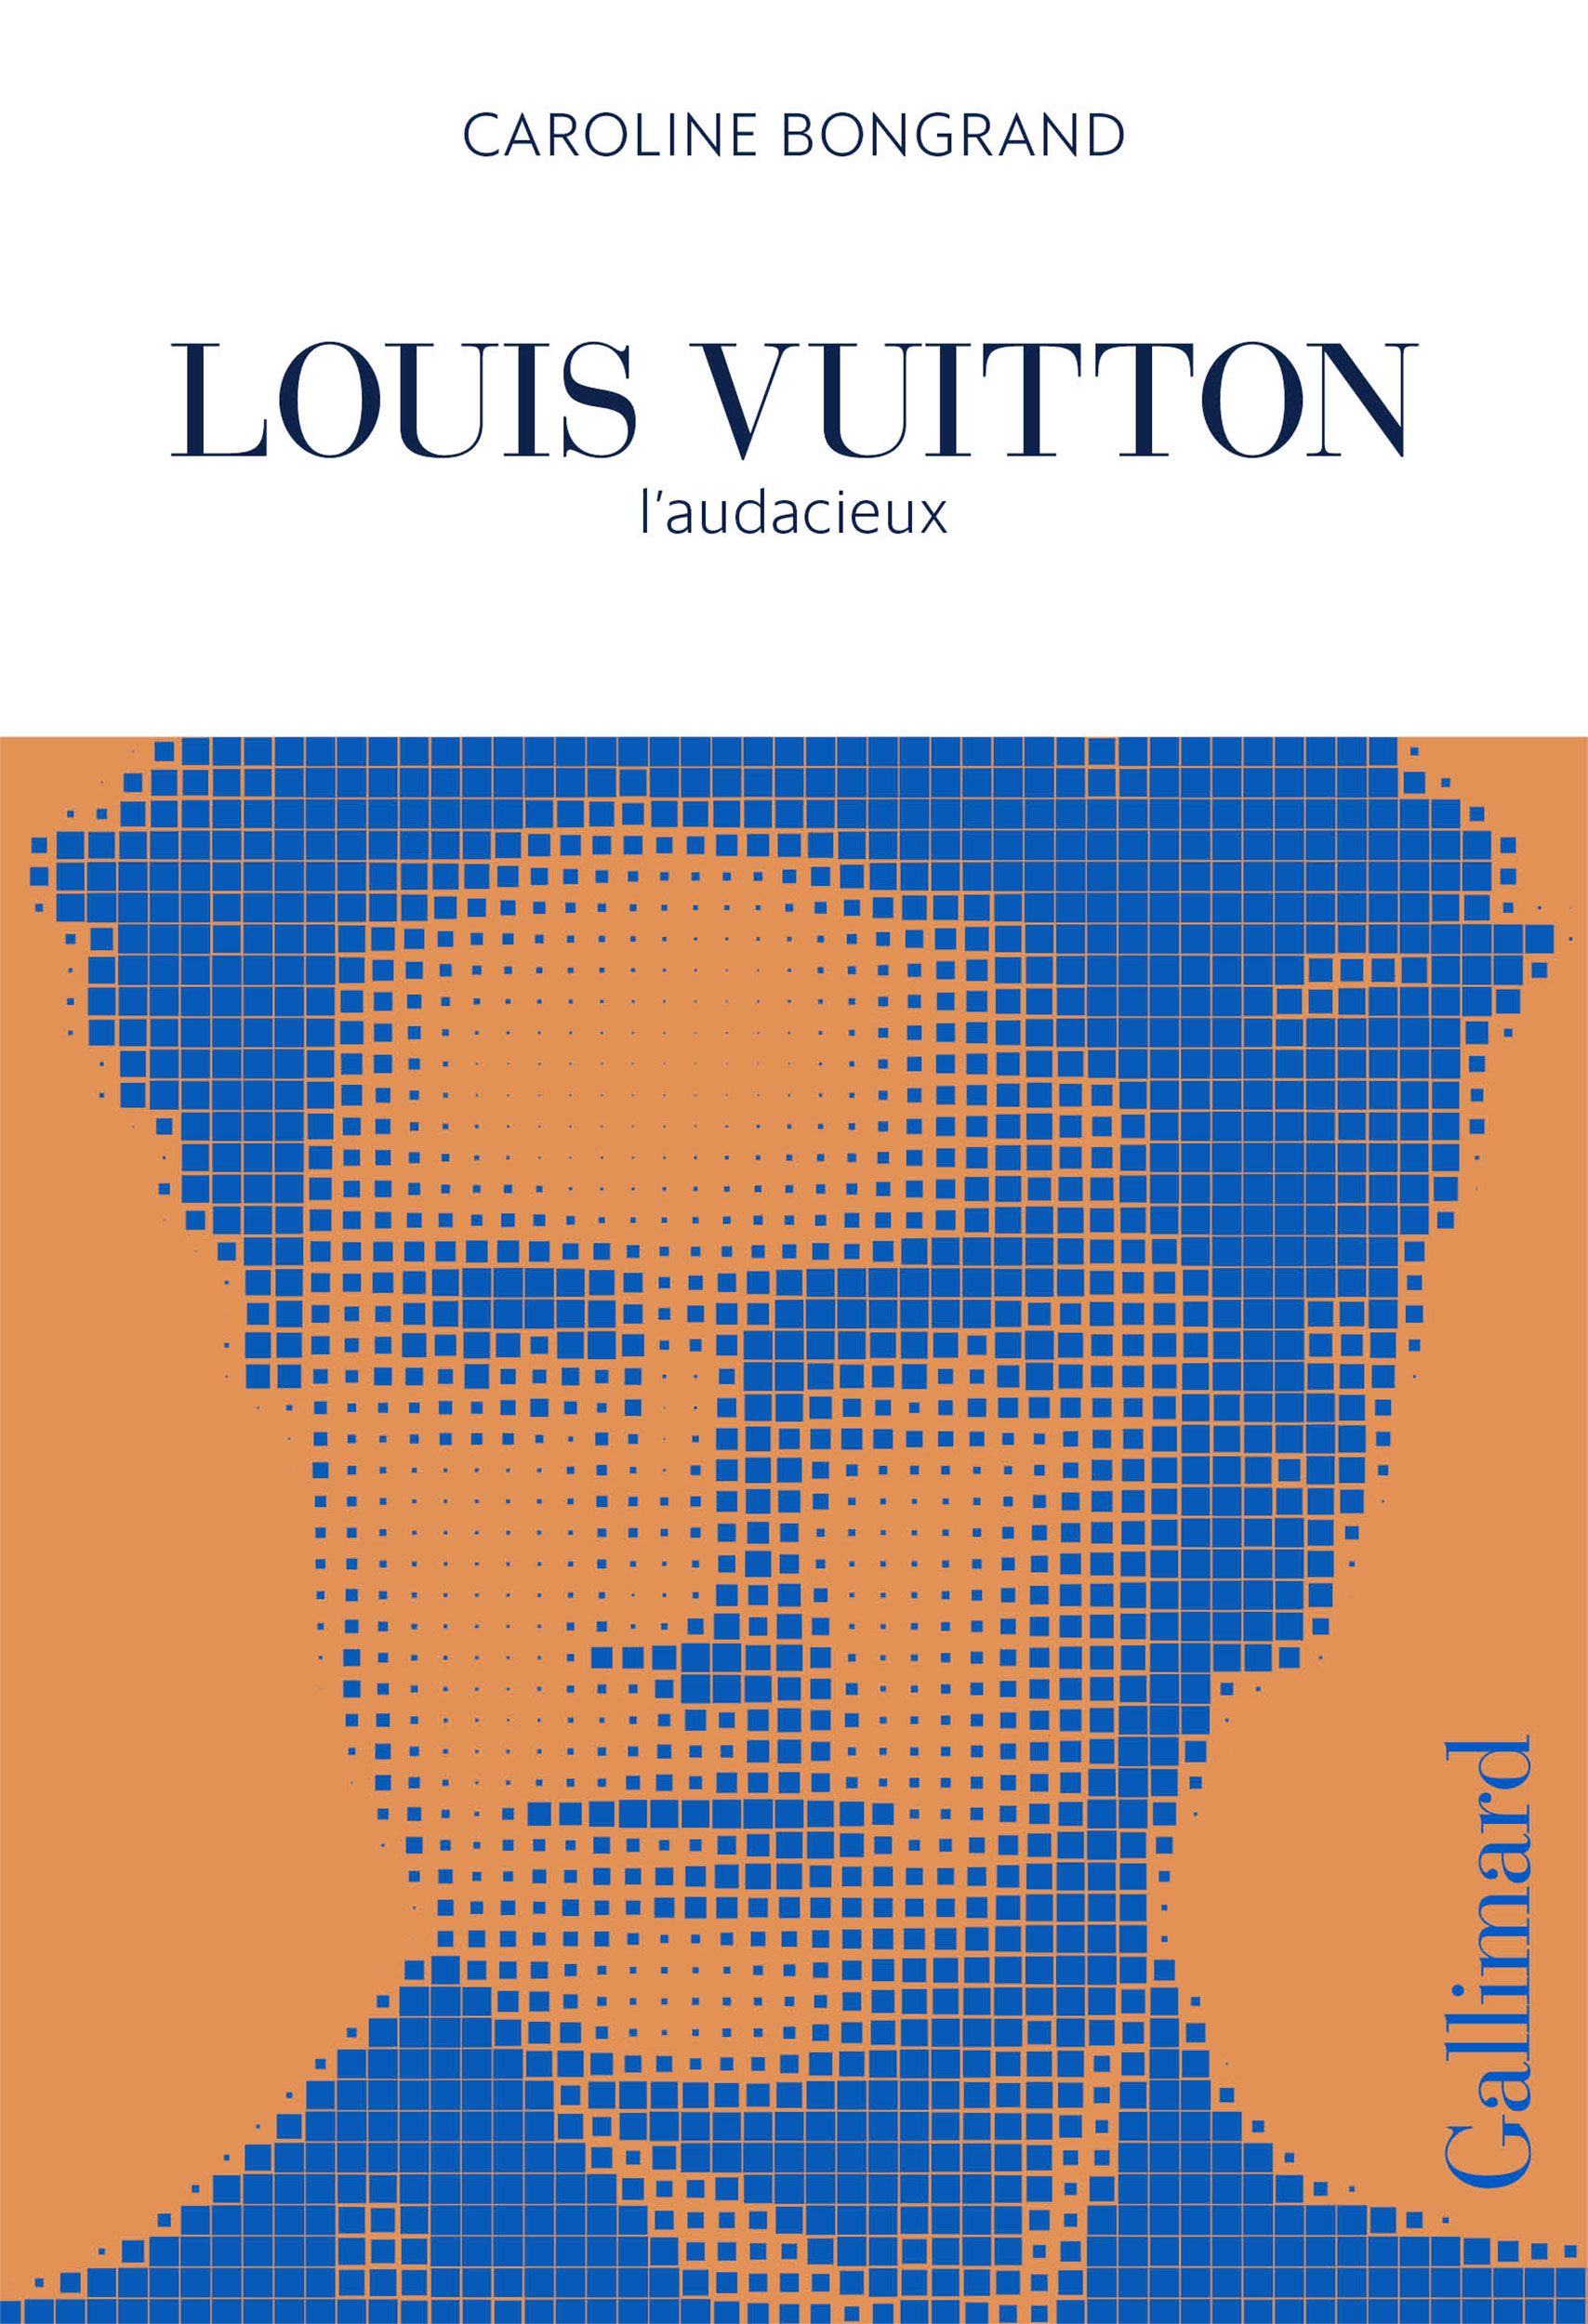 Louis Vuitton's 200th Birthday: A History of the Iconic Brand